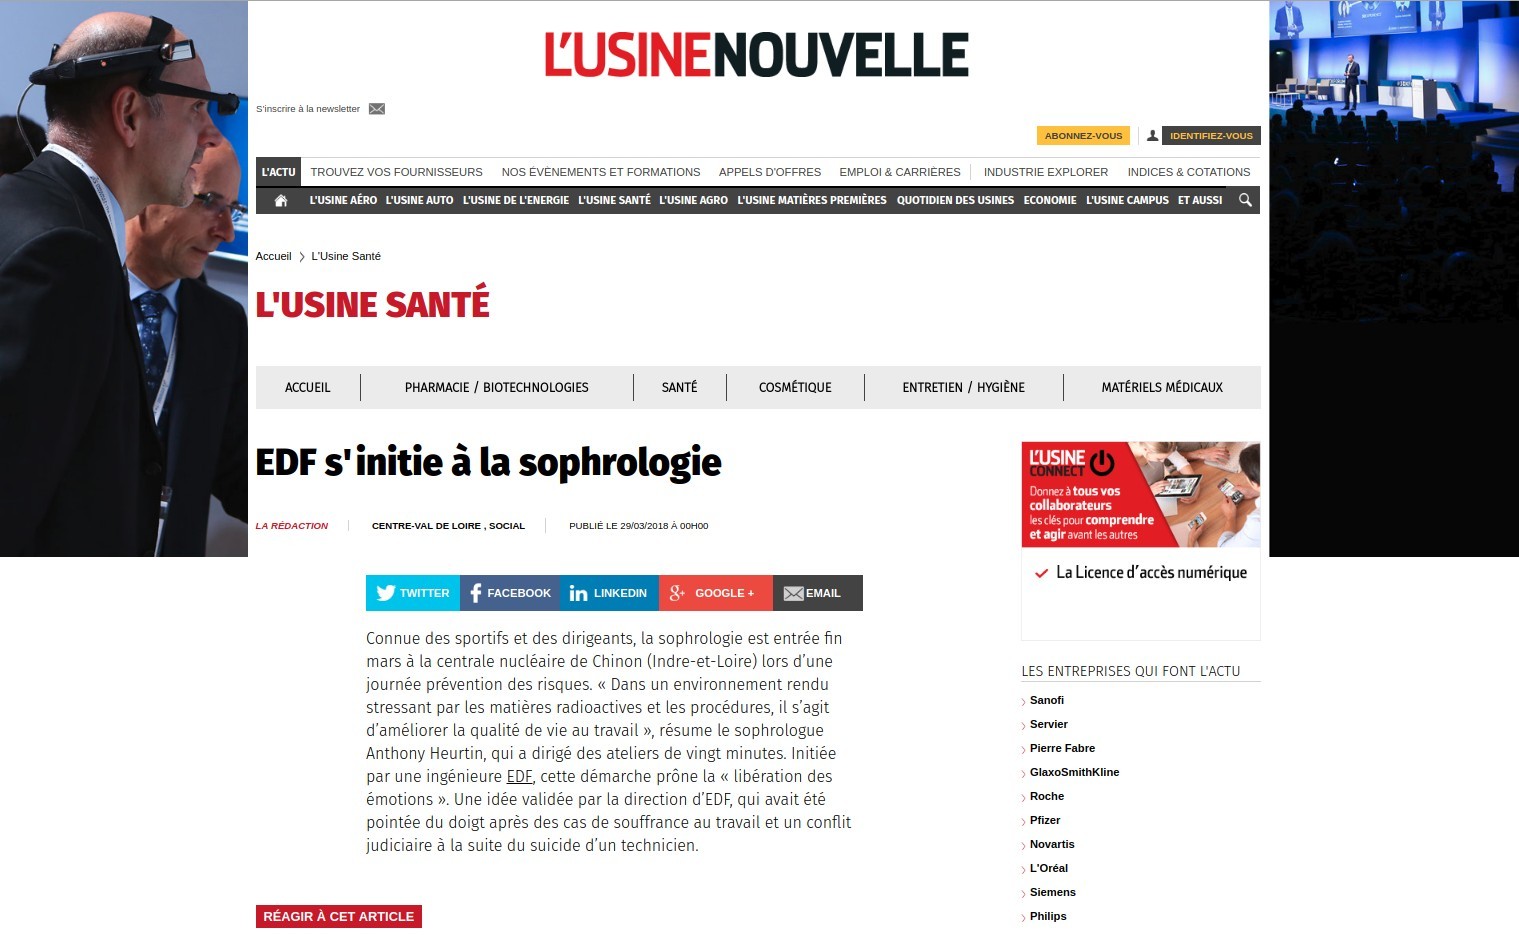 Article Usine nouvelle EDF sophrologie stress souffrance travail suicide prevention risque Anthony Heurtin sophrologue